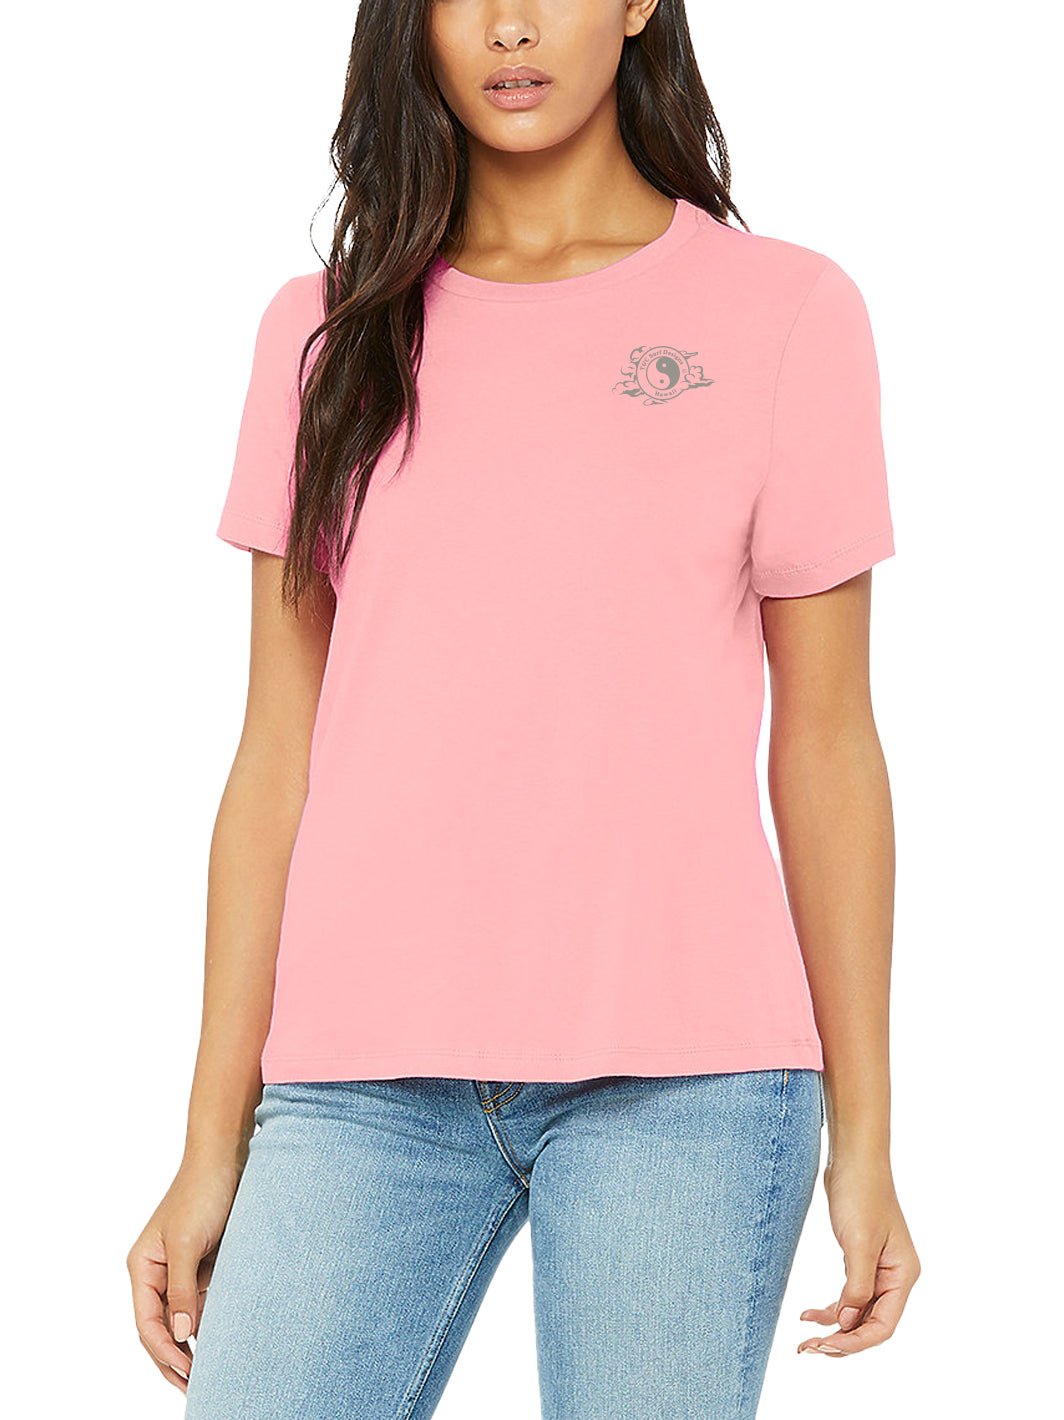 T&C Surf Designs T&C Surf Island Hopping Relax Tee, 